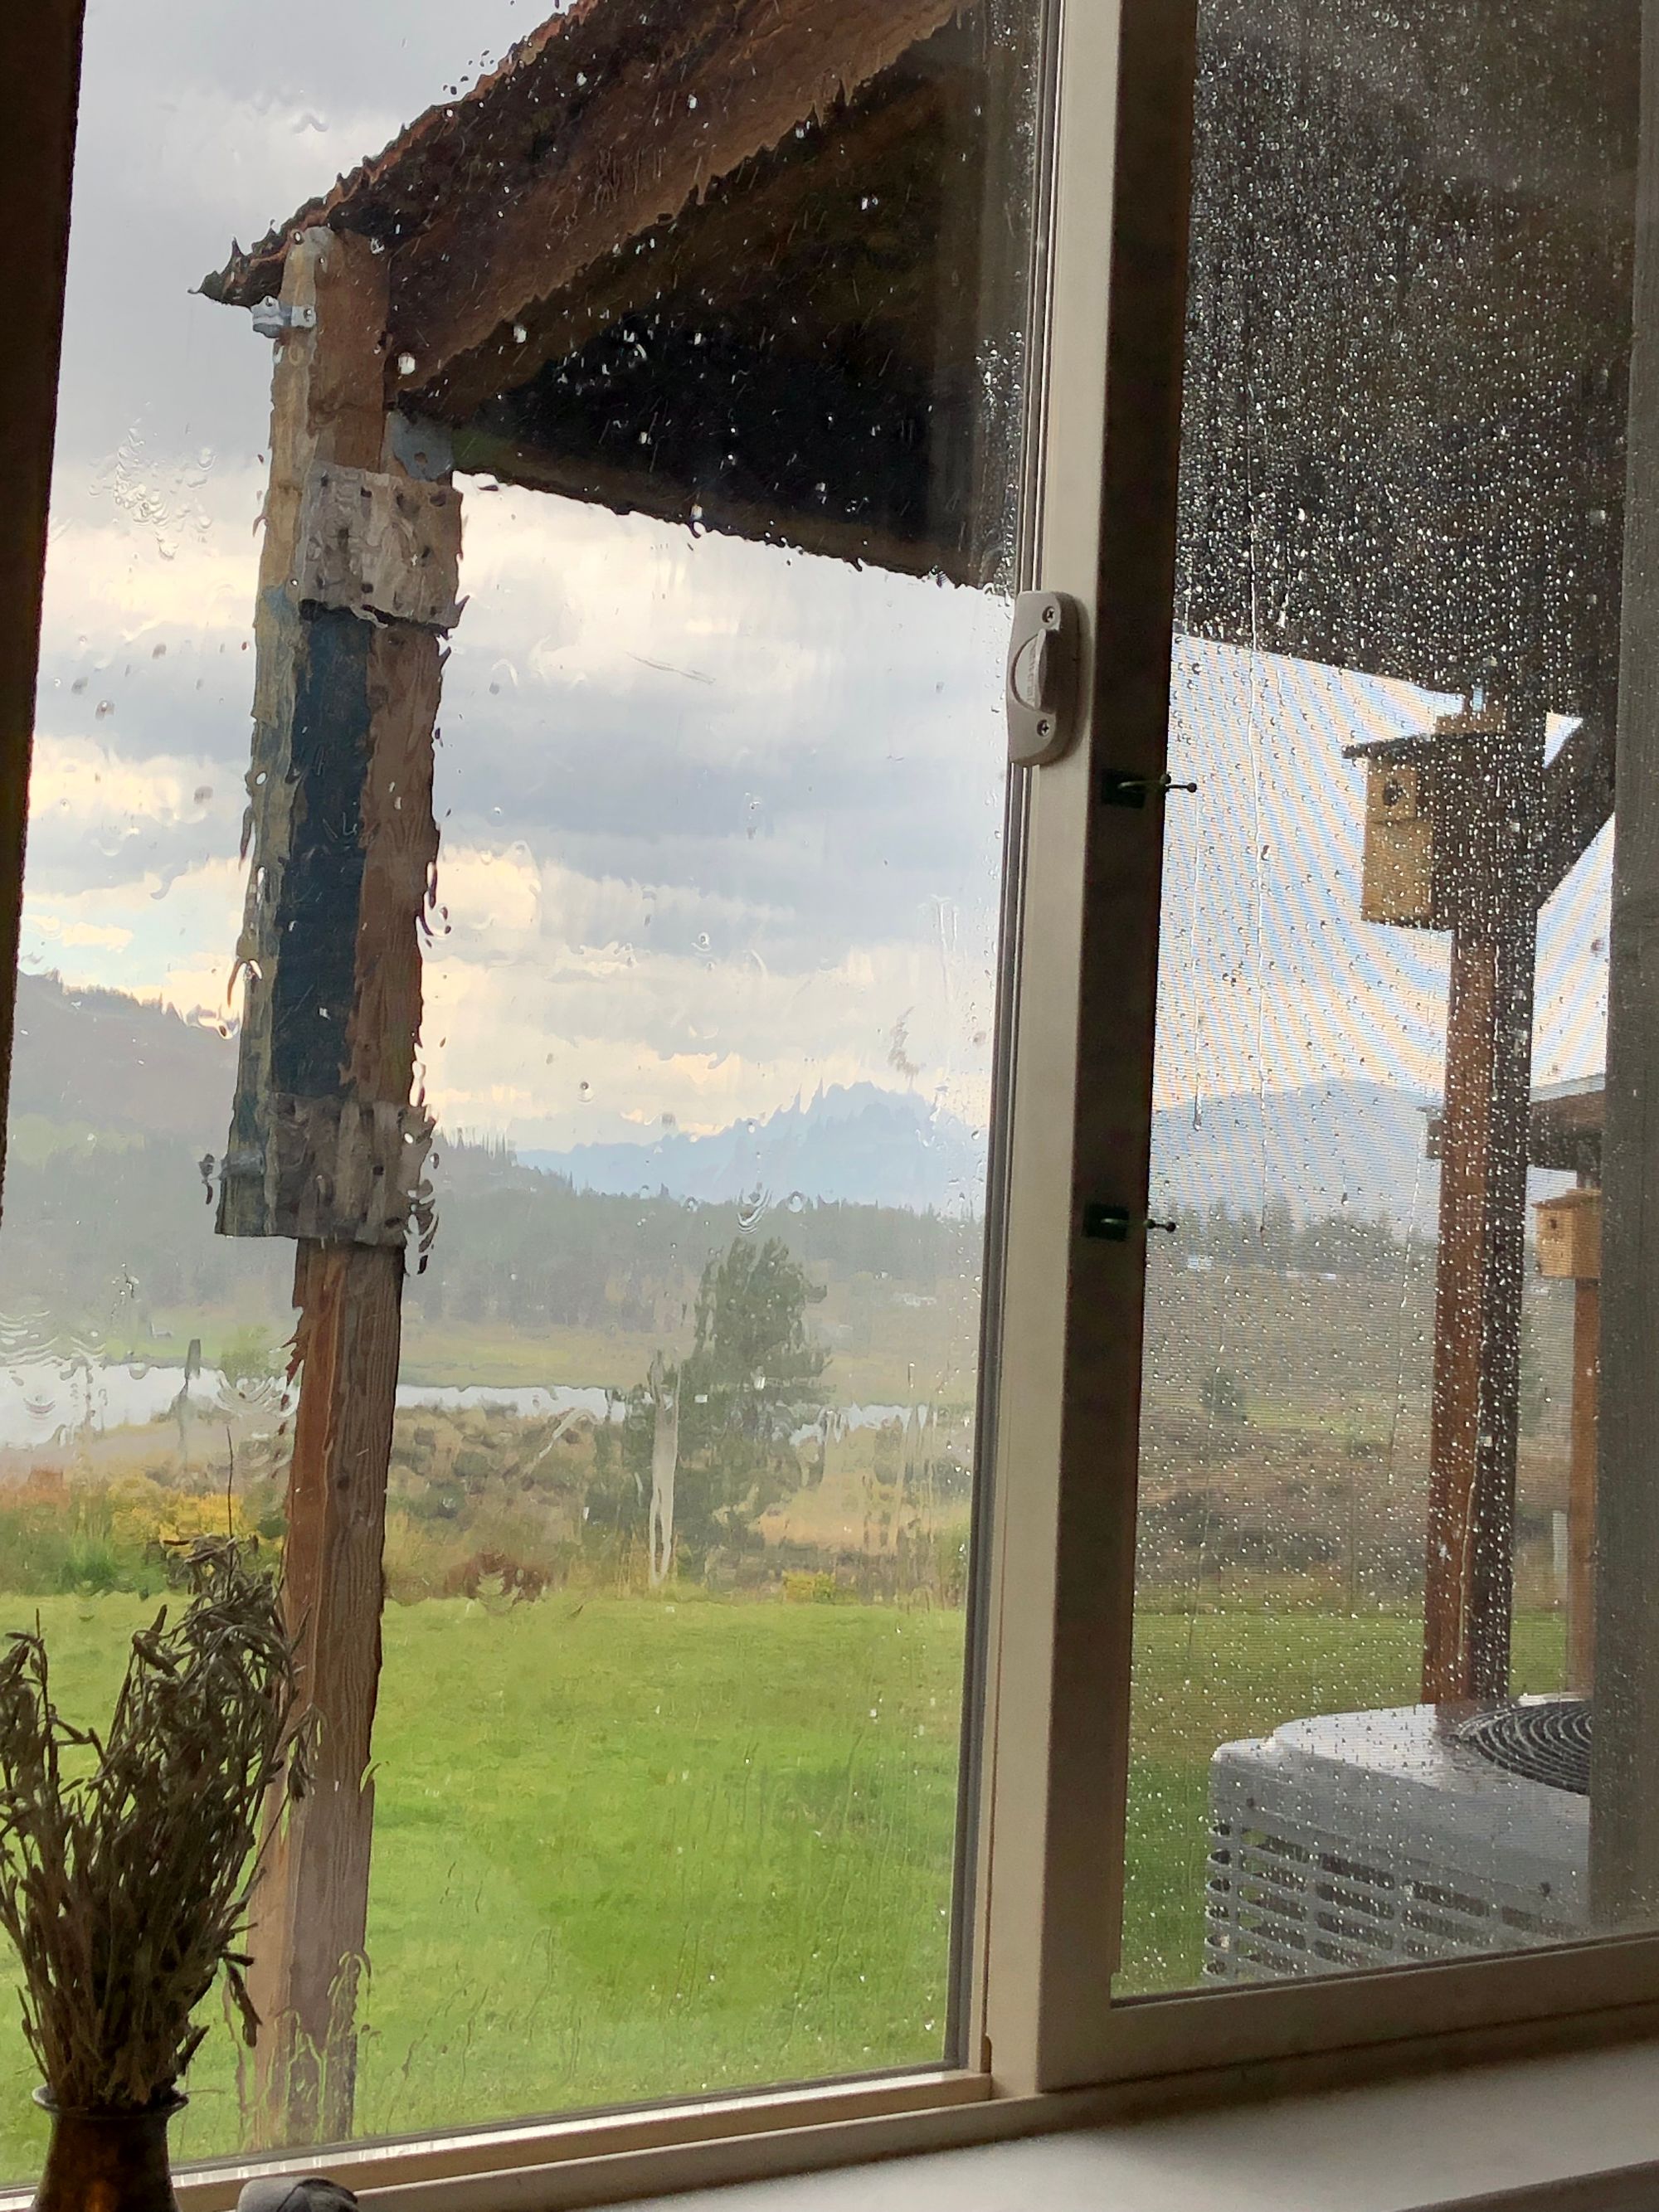 rain in the Methow Valley